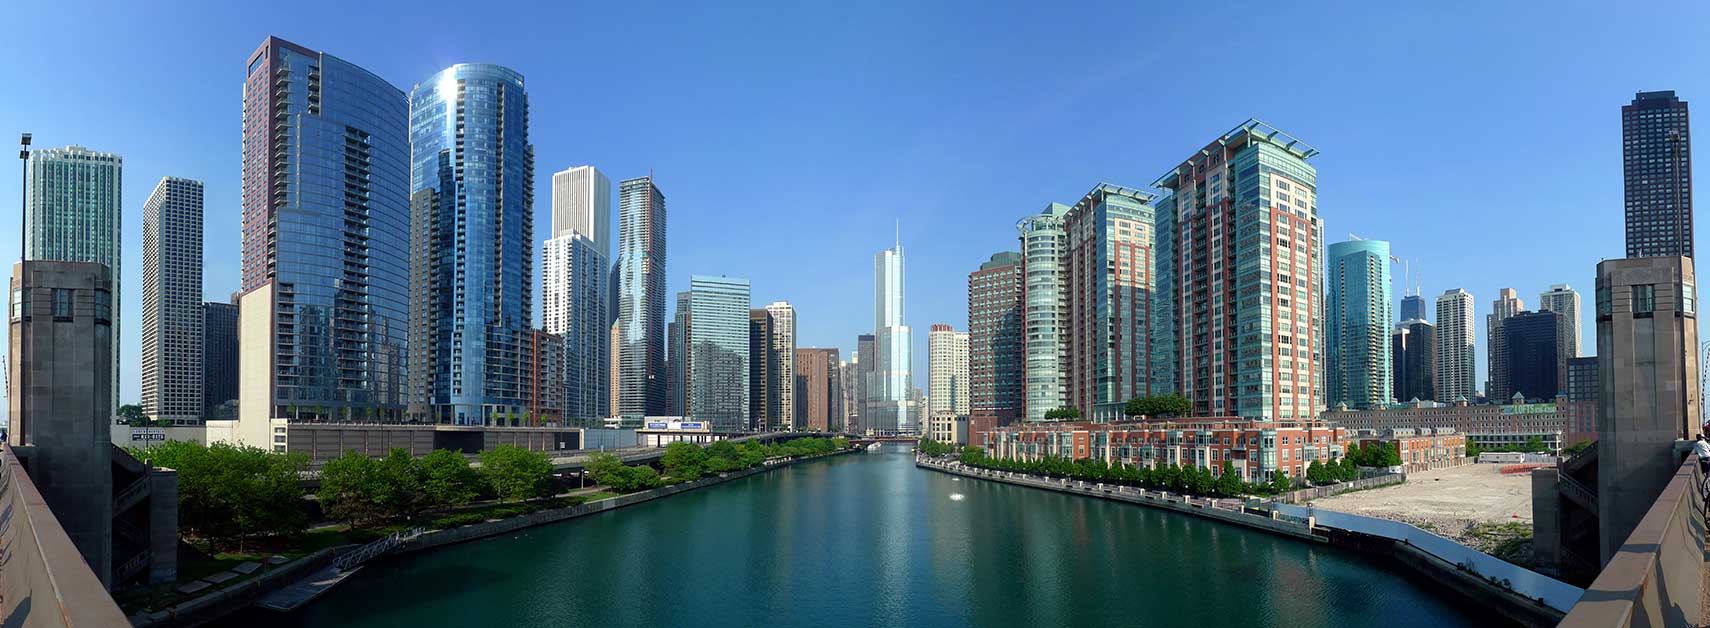 Downtown Chicago at the main branch of the Chicago River